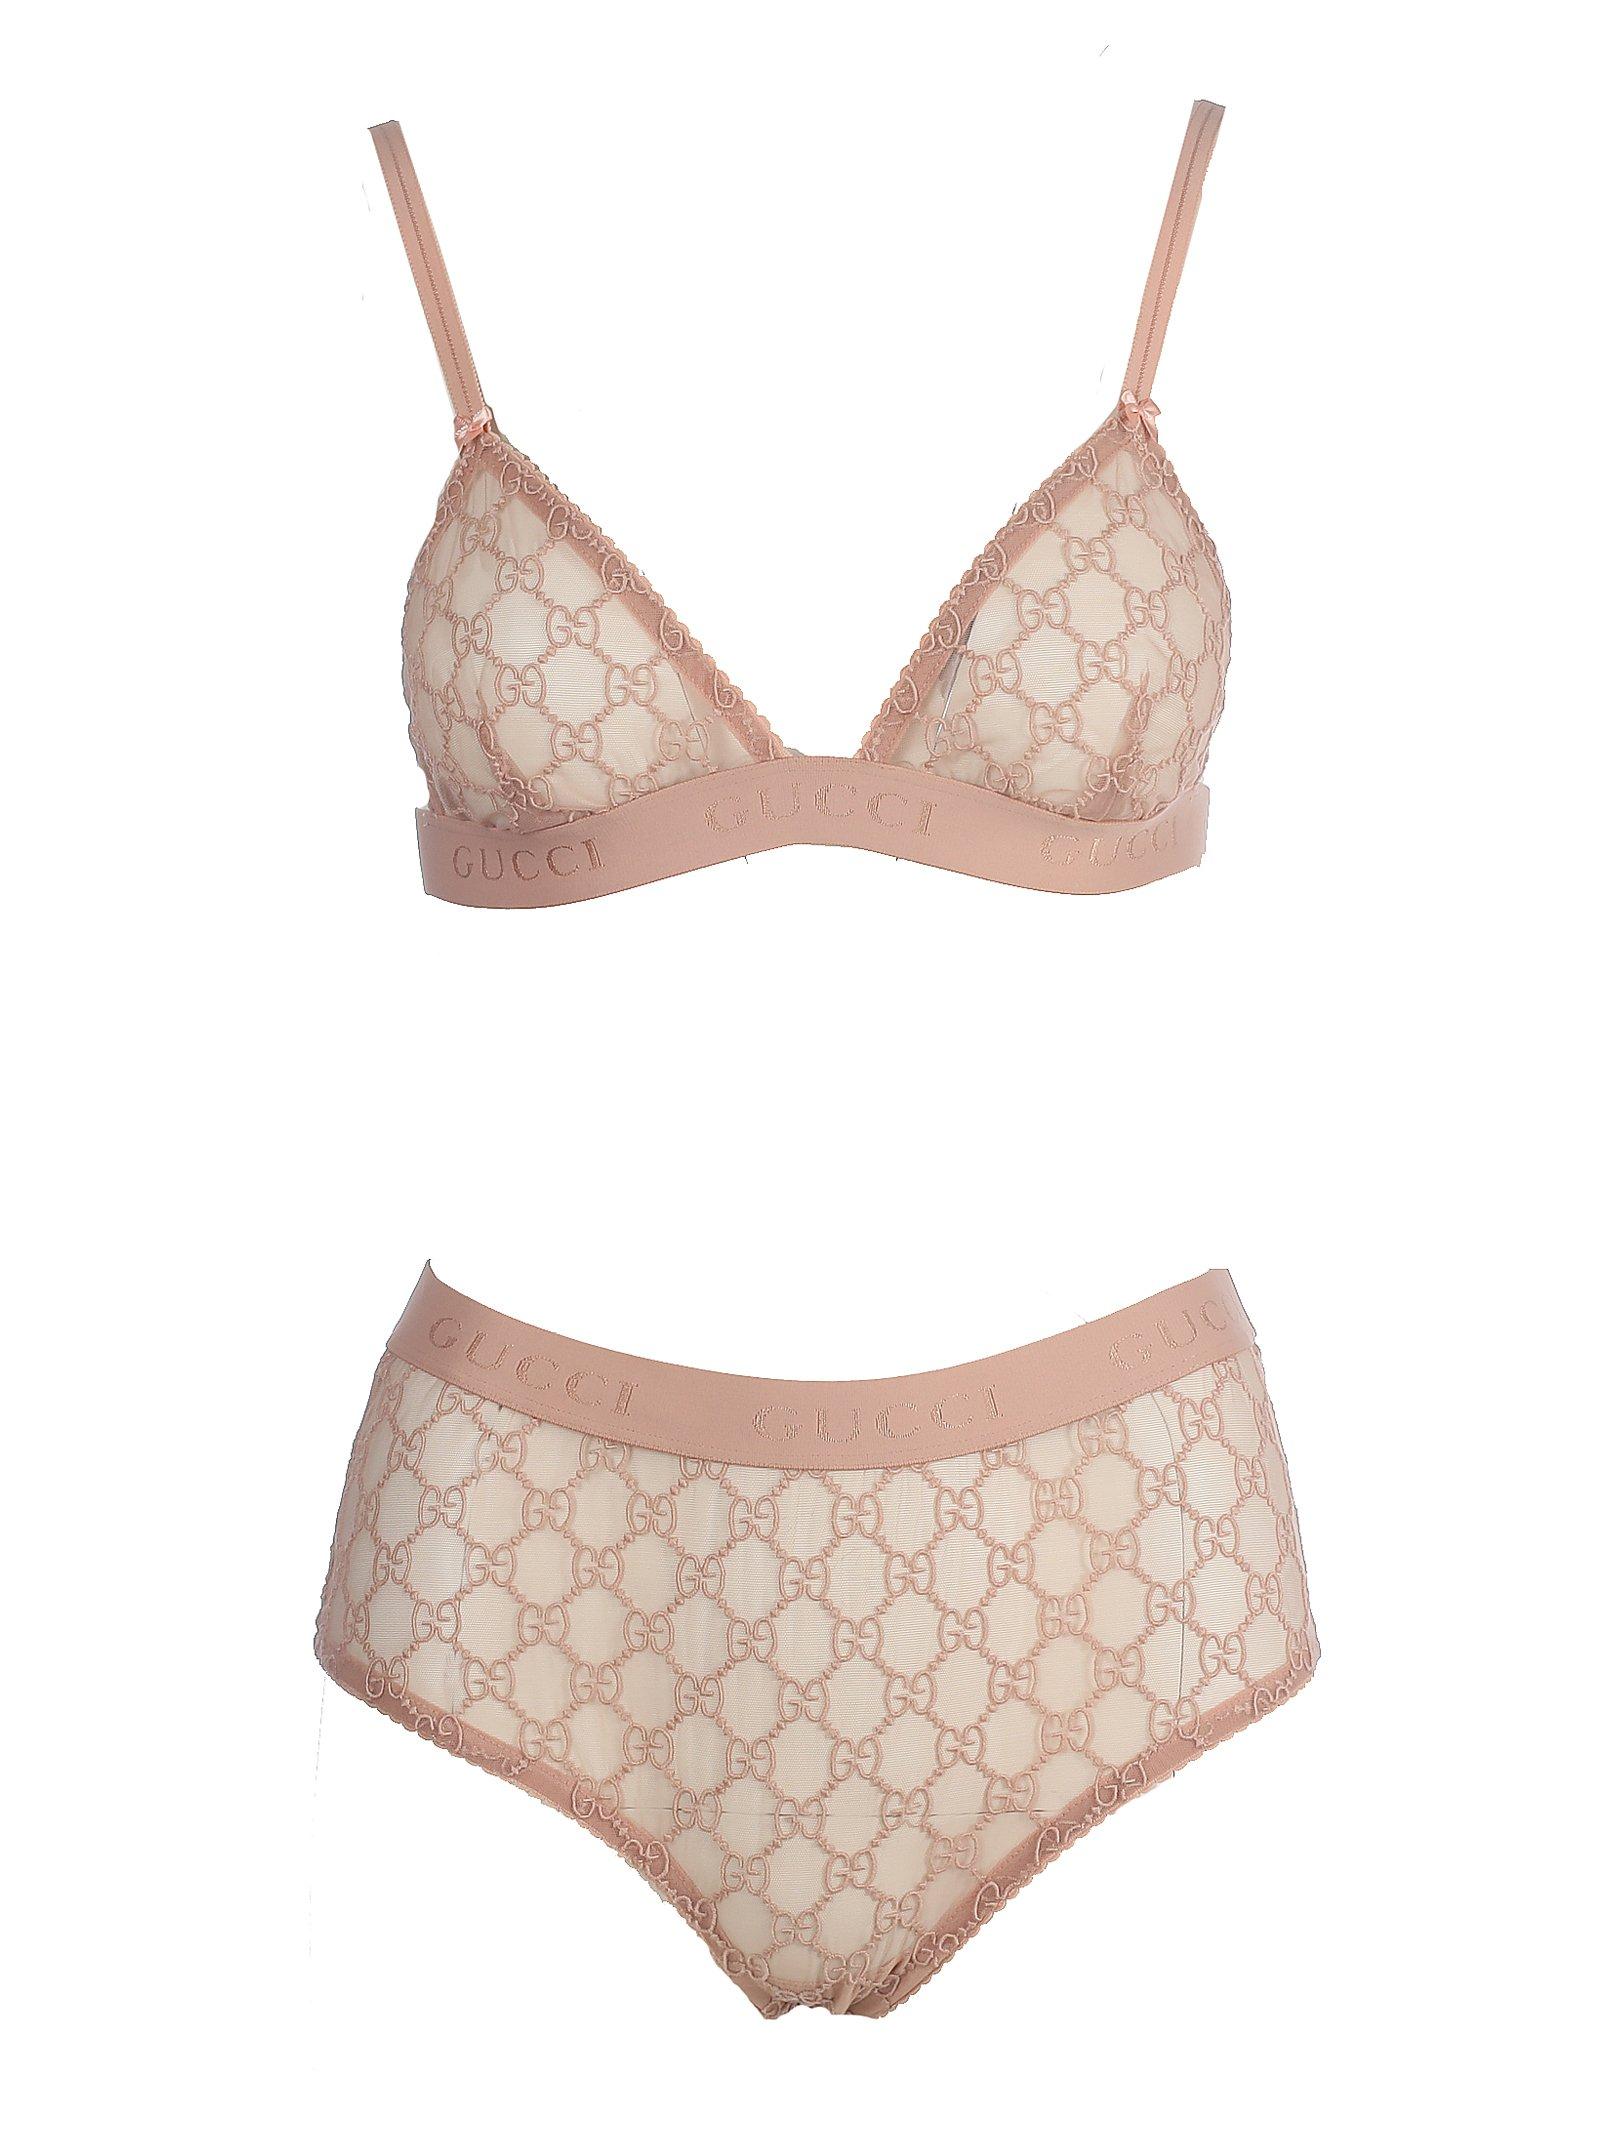 Gucci Cotton GG Monogram Pattern Lingerie Set in Pink - Lyst